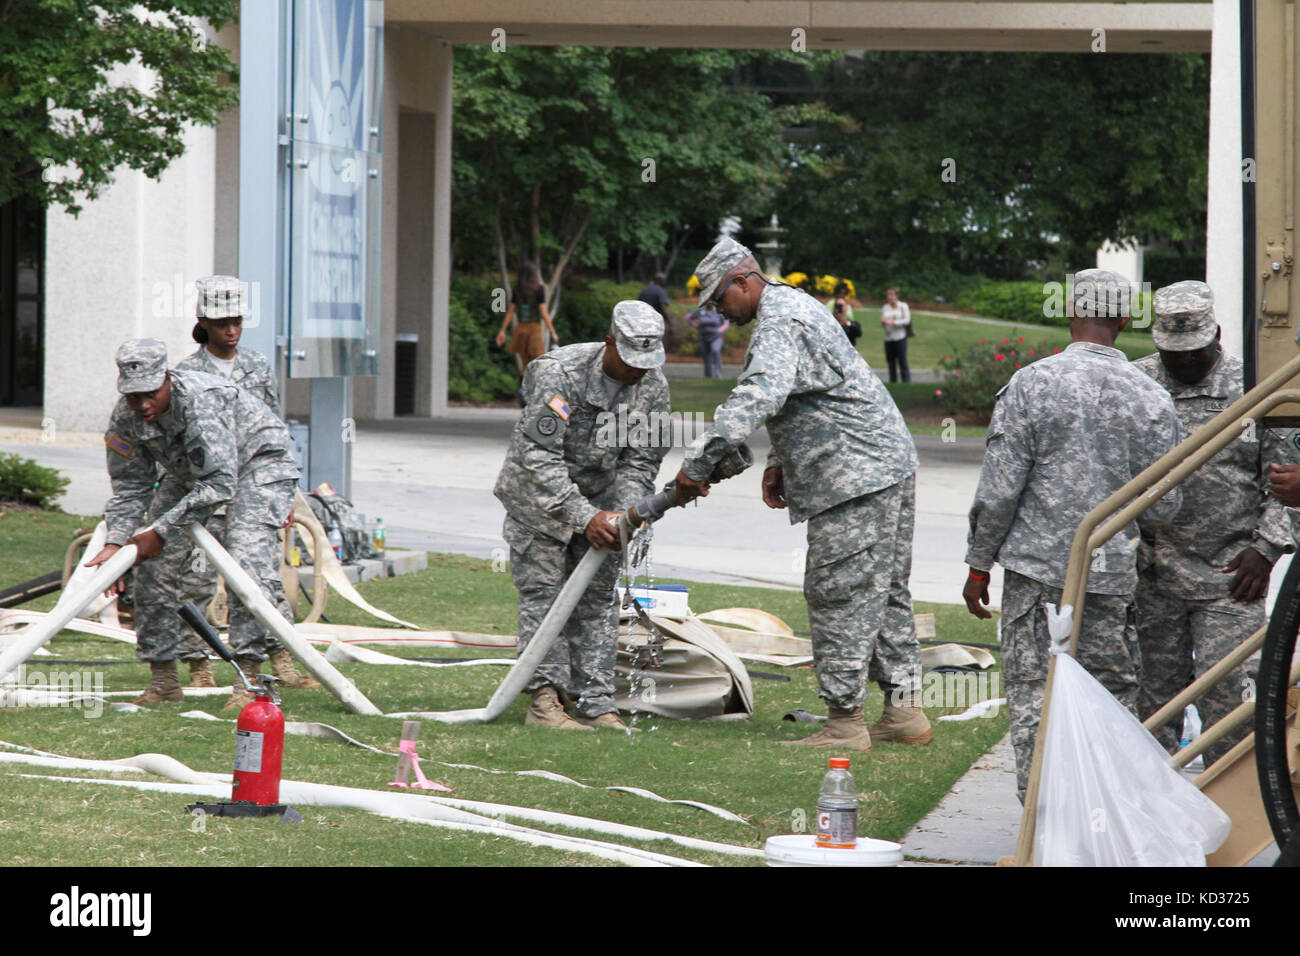 S.C. National Guard Soldiers from the 741st Quartermaster Battalion drag hoses around the grounds of Richland Memorial Hospital that will connect to water treatment equipment, Oct 8. The 741st Quartermaster Battalion and 218th Brigade Support Battalion worked together to purify water for the hospital since most of Columbia was under a boil-water advisory. Guardsmen have been assisting in a variety of ways throughout the state after the worst rains and flooding in recorded history. The S.C. National Guard was on call before the storms hit and continued to provide support to the state’s citizens Stock Photo